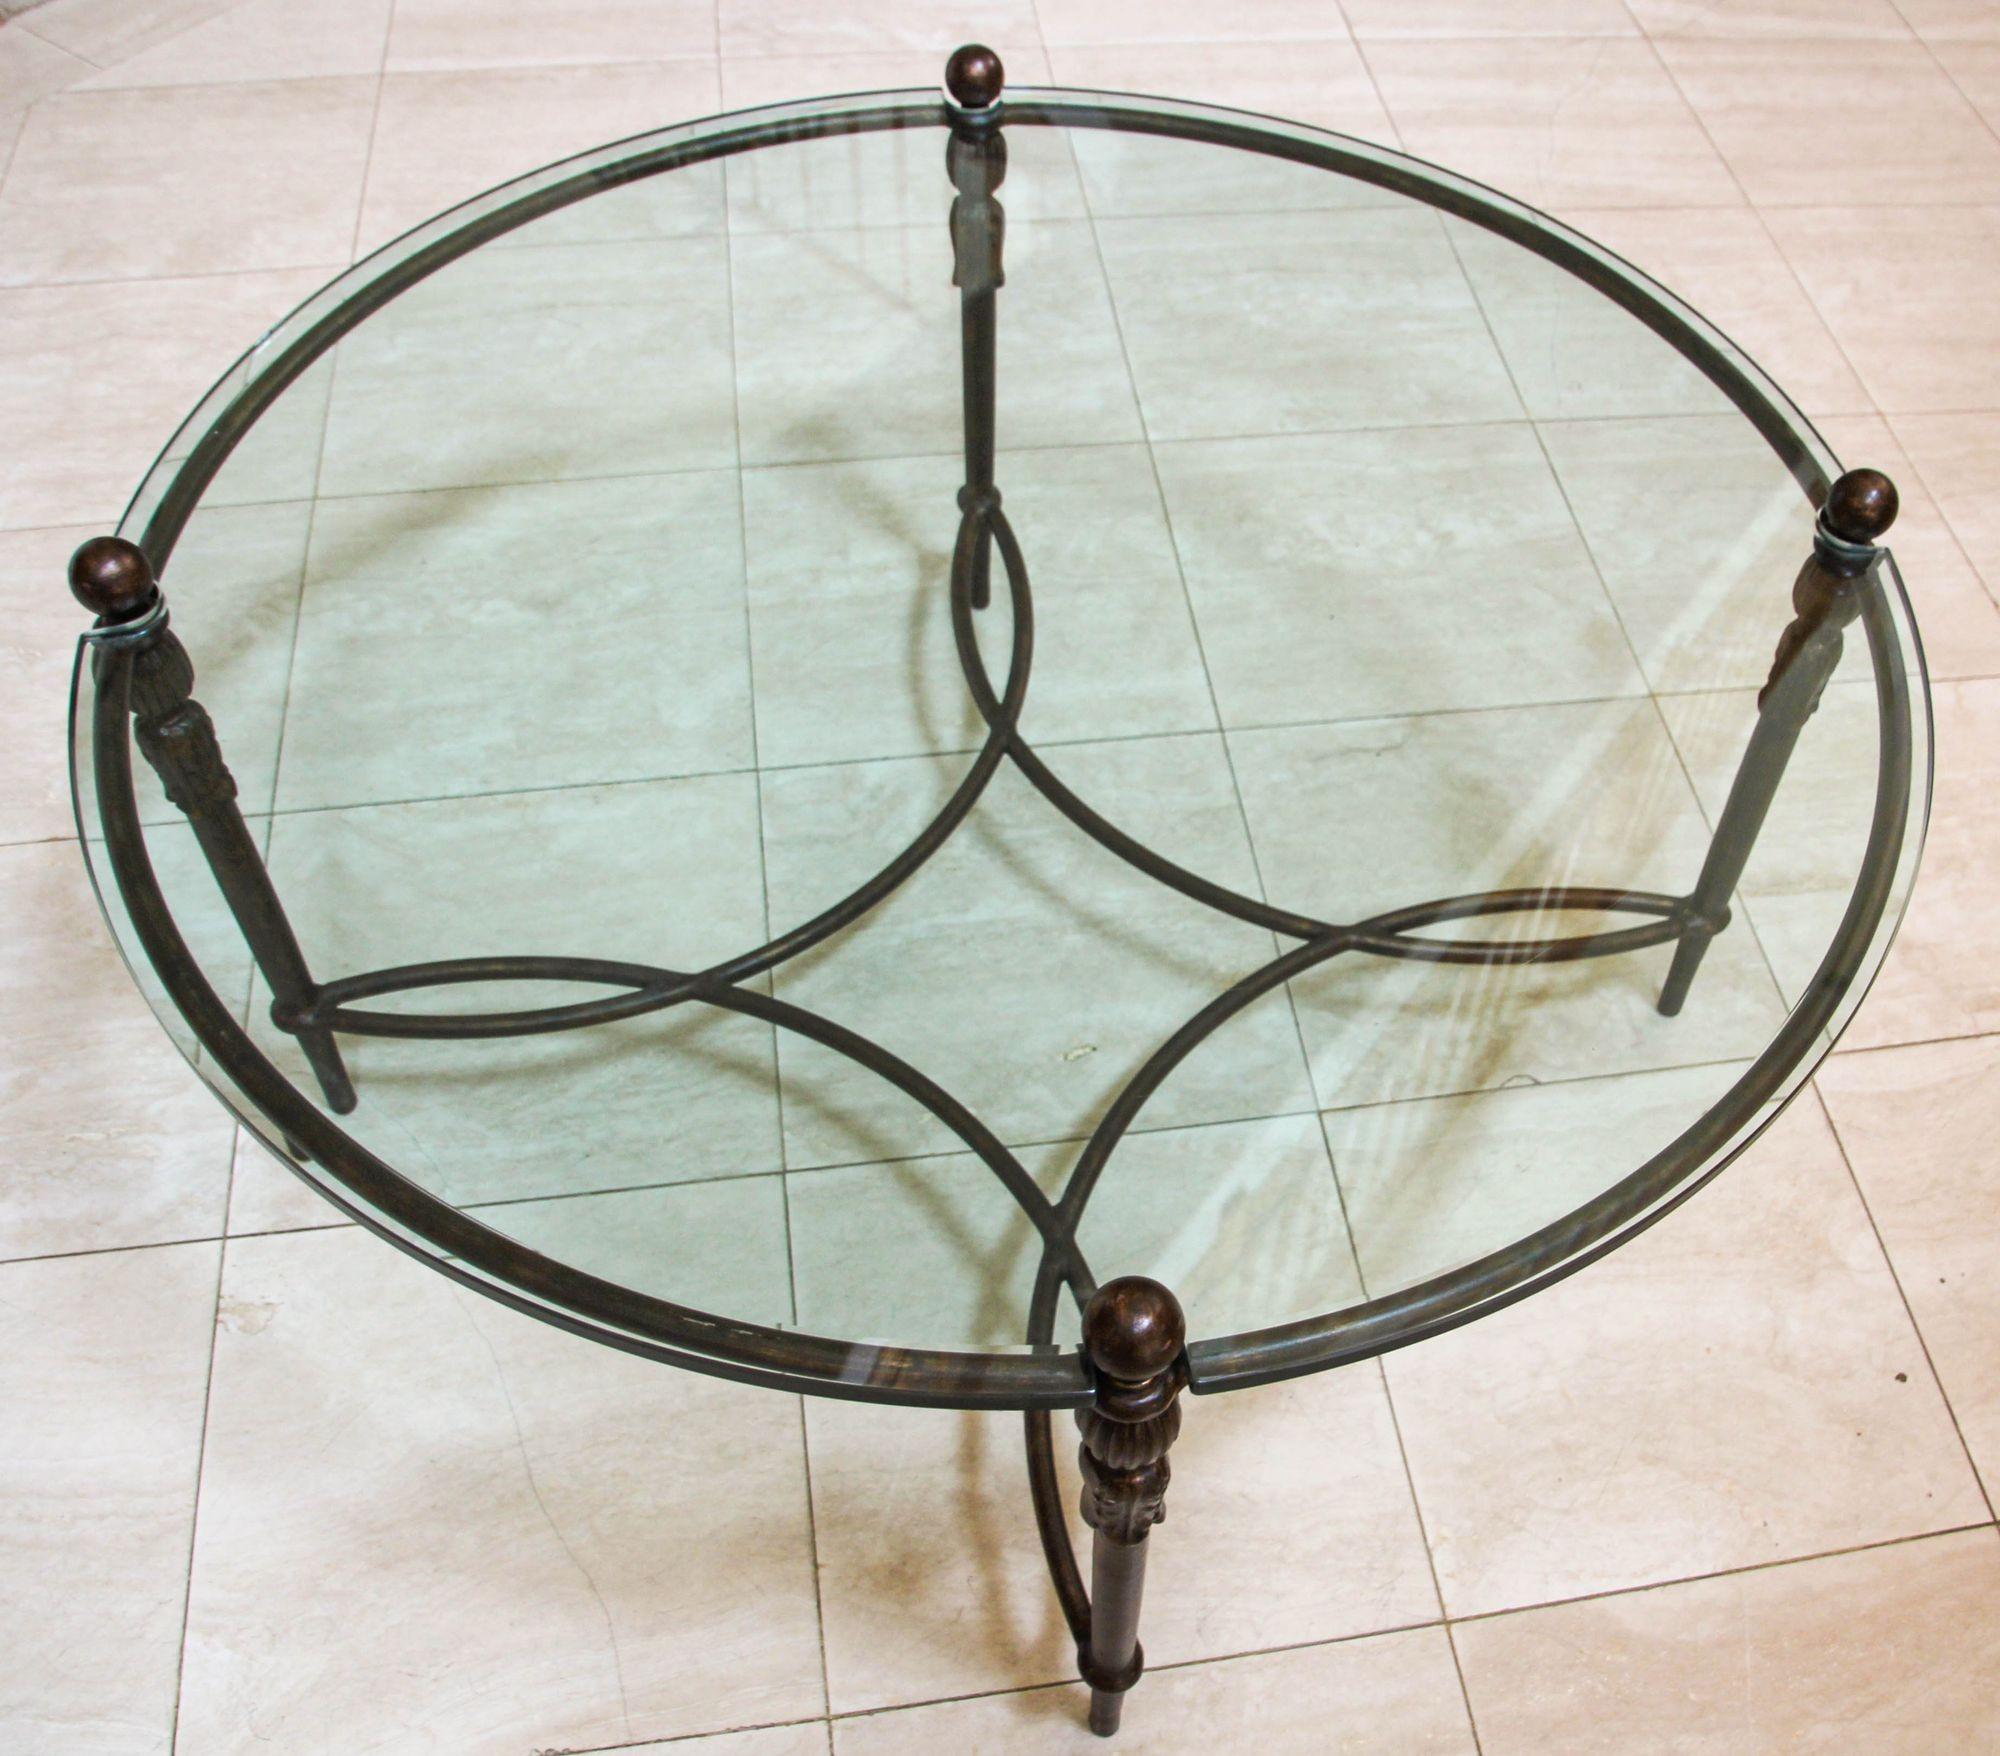 Michael Taylor Montecito Round Glass Coffee Table Outdoor Indoor Cocktail Table.
Constructed from solid aluminum for outdoor use with a premium dark oiled bronze finish.
The coffee table frame decorated in the neoclassical taste with acanthus